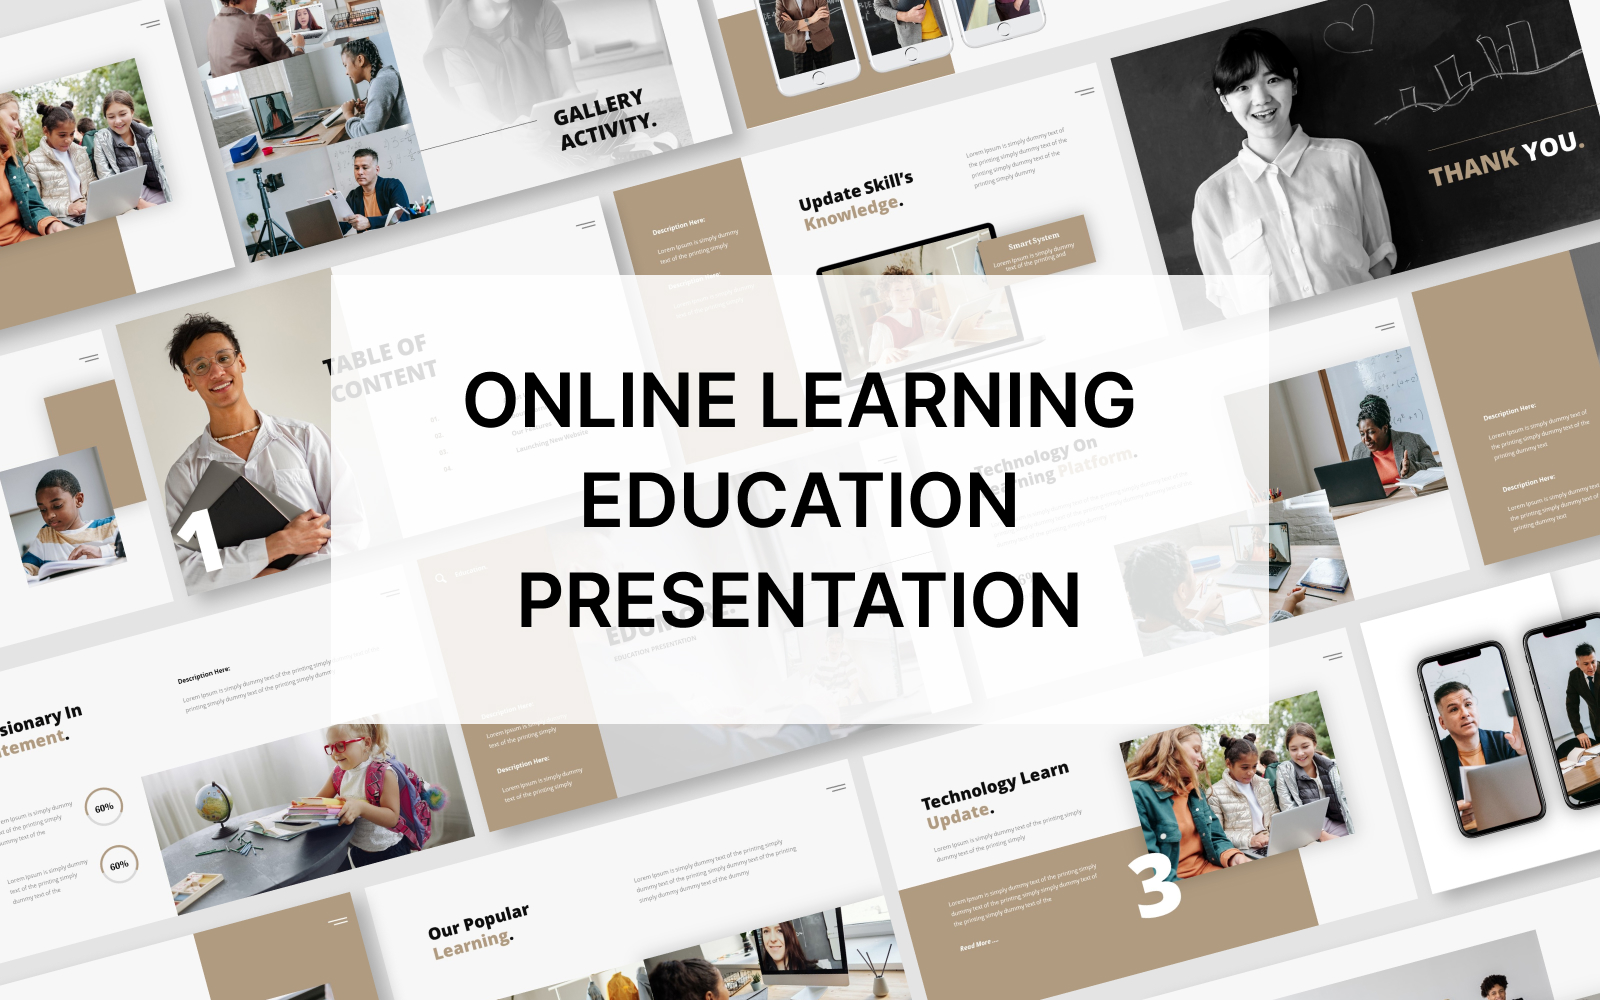 Online Learning Education Powerpoint Presentation Template